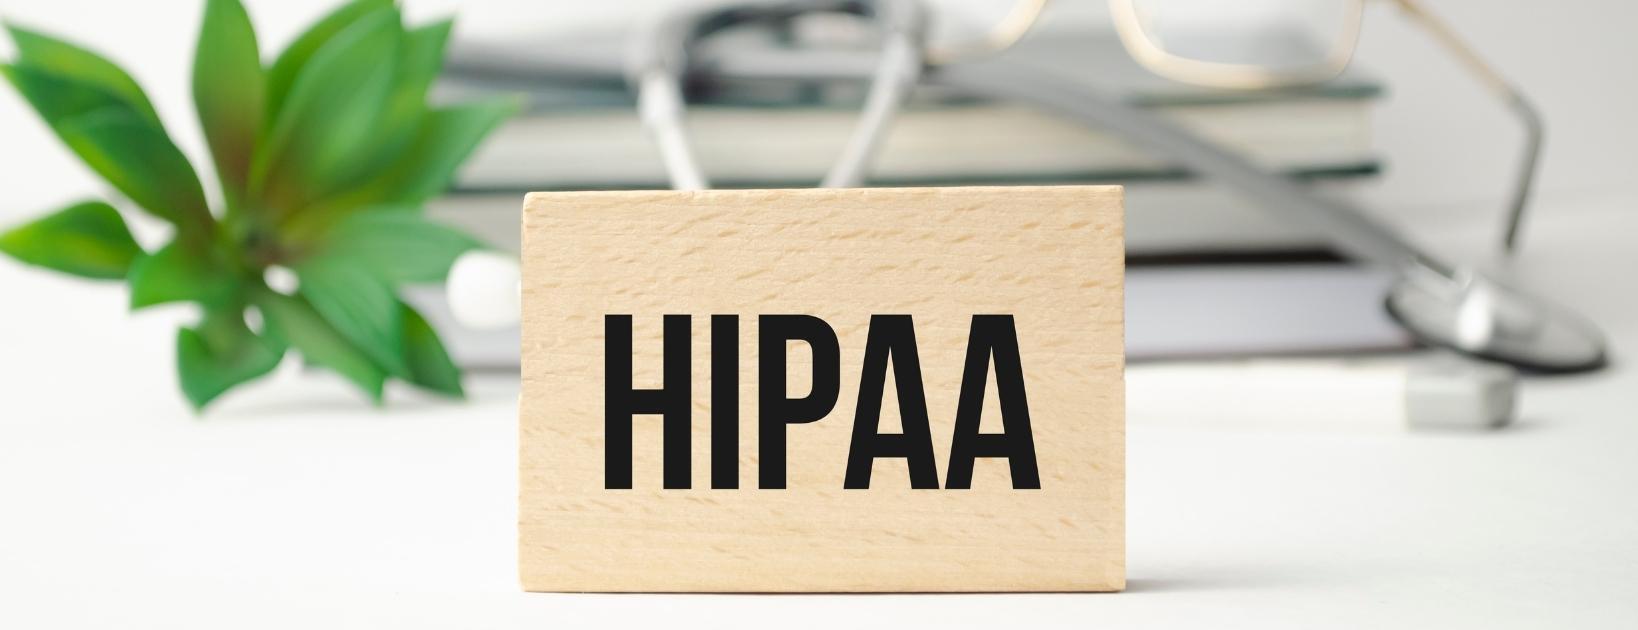 HIPAA Security Requirements for Business Associates